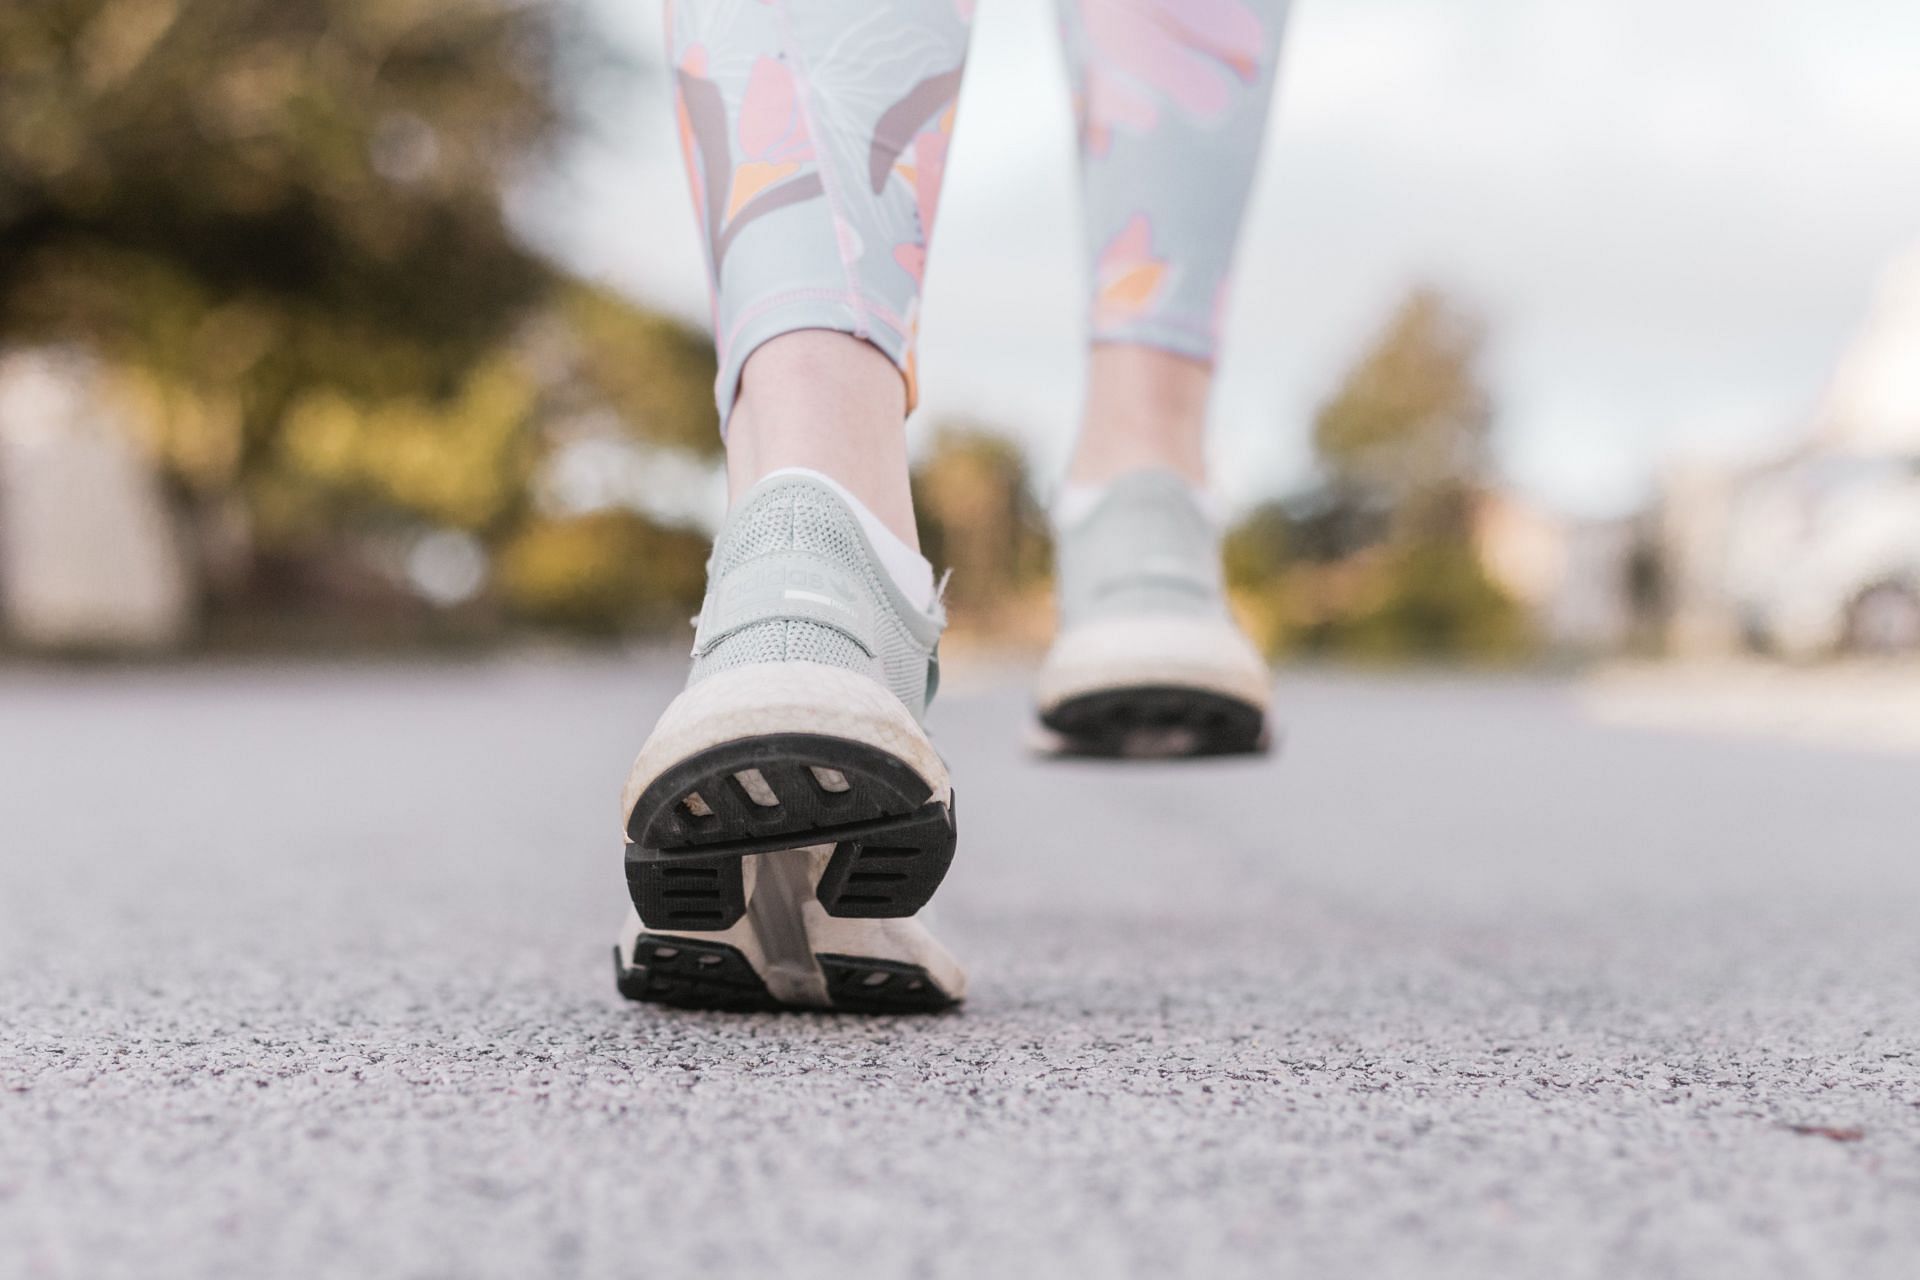 An average person takes between 2,000 and 7,000 steps in a mile. (Image via Unsplash / Sincerely Media)